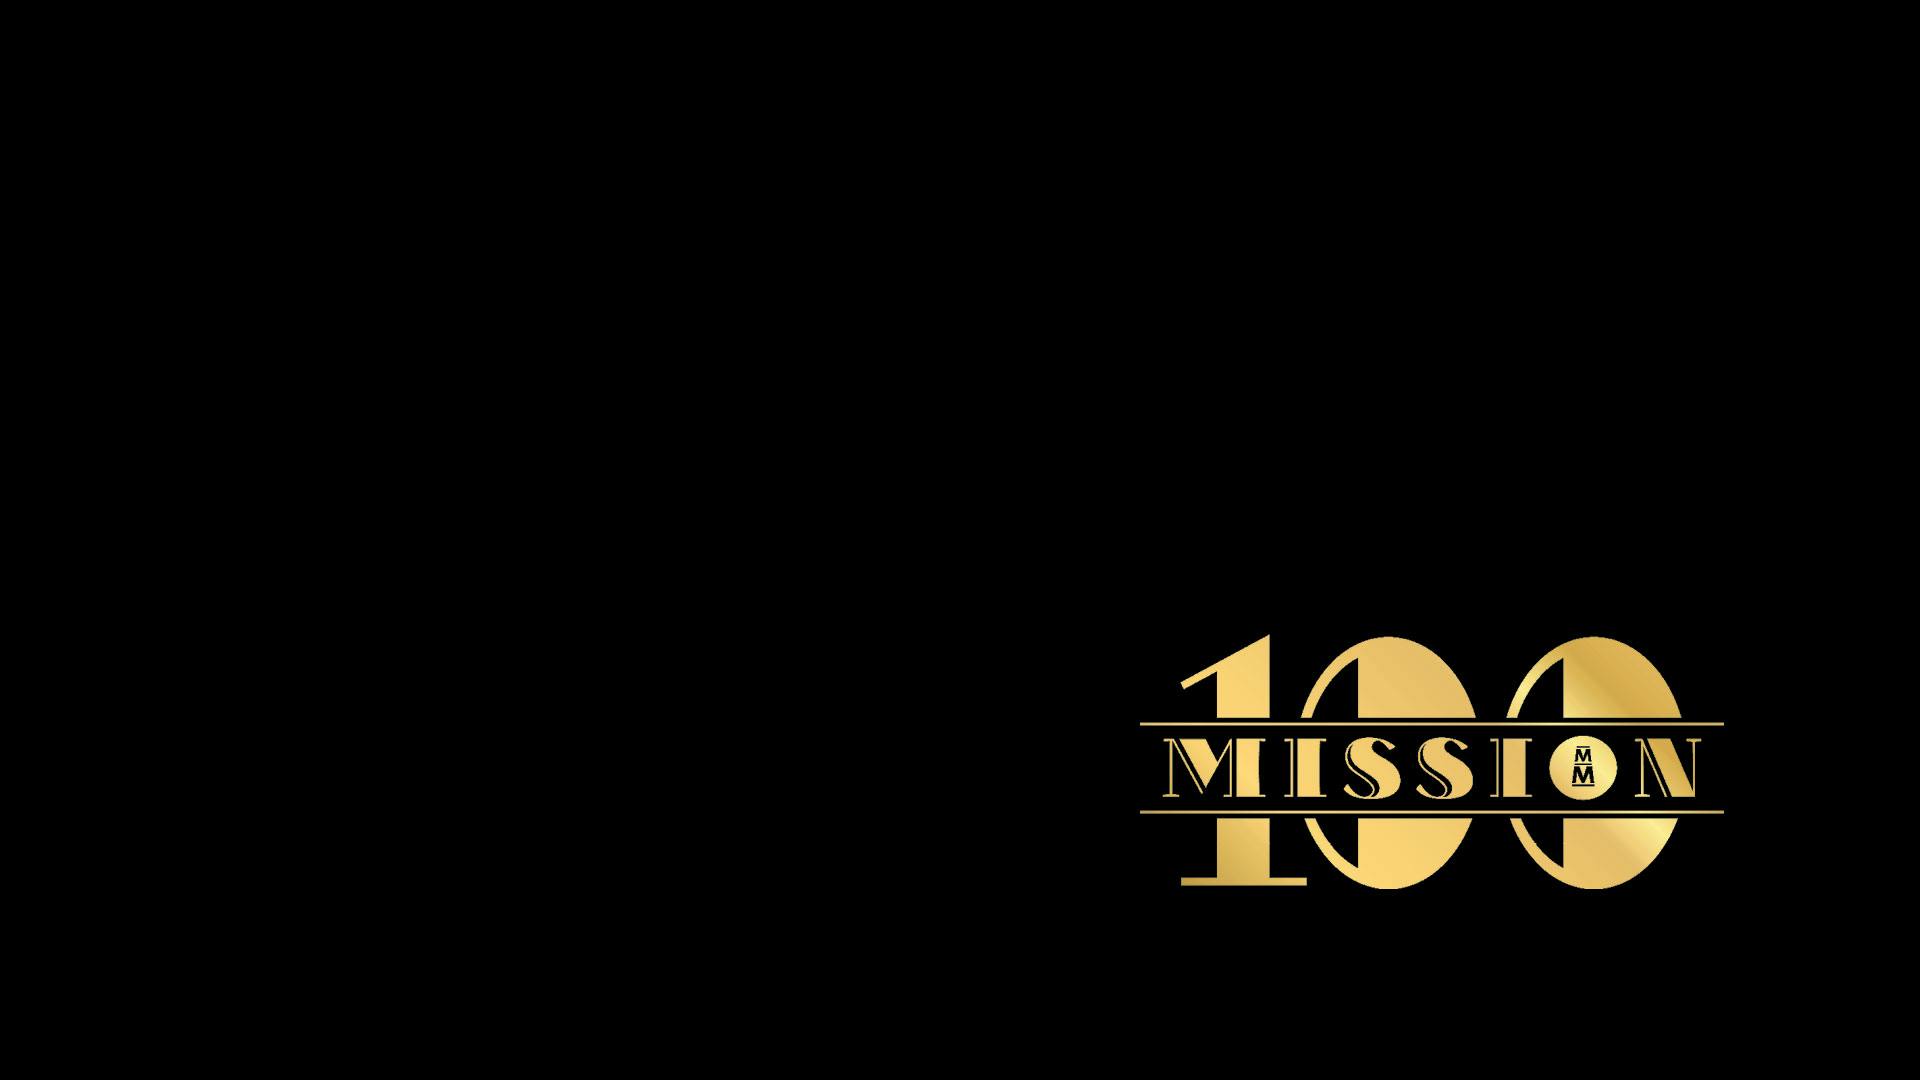 Black screen with a golden MISSION logo over a golden 100